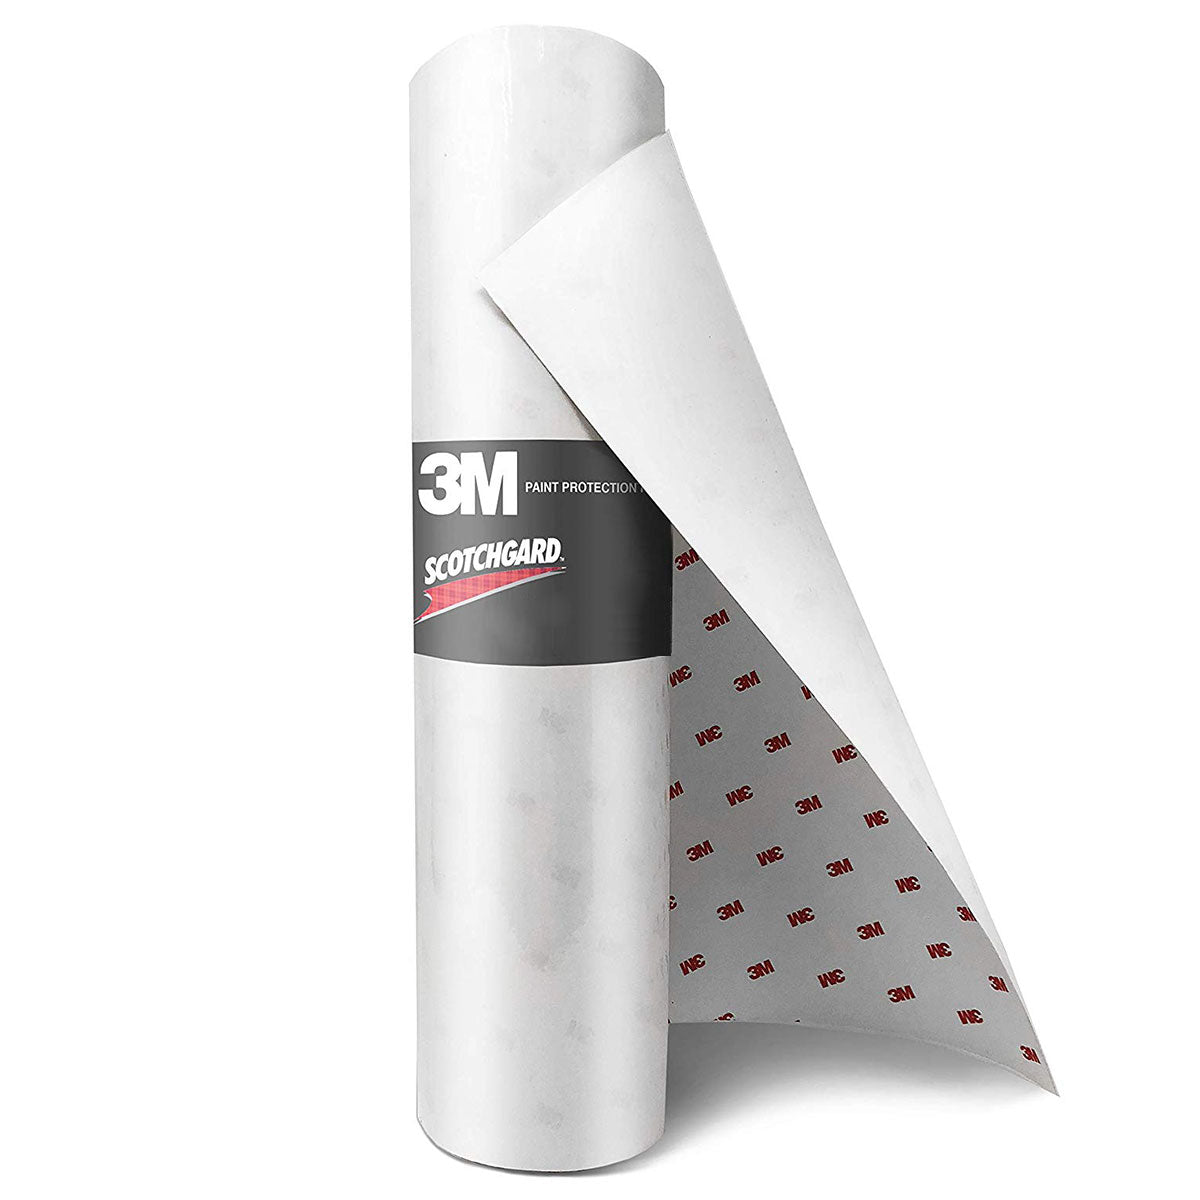 3M Paint Protection Clear Film Roll 100mm wide per meter